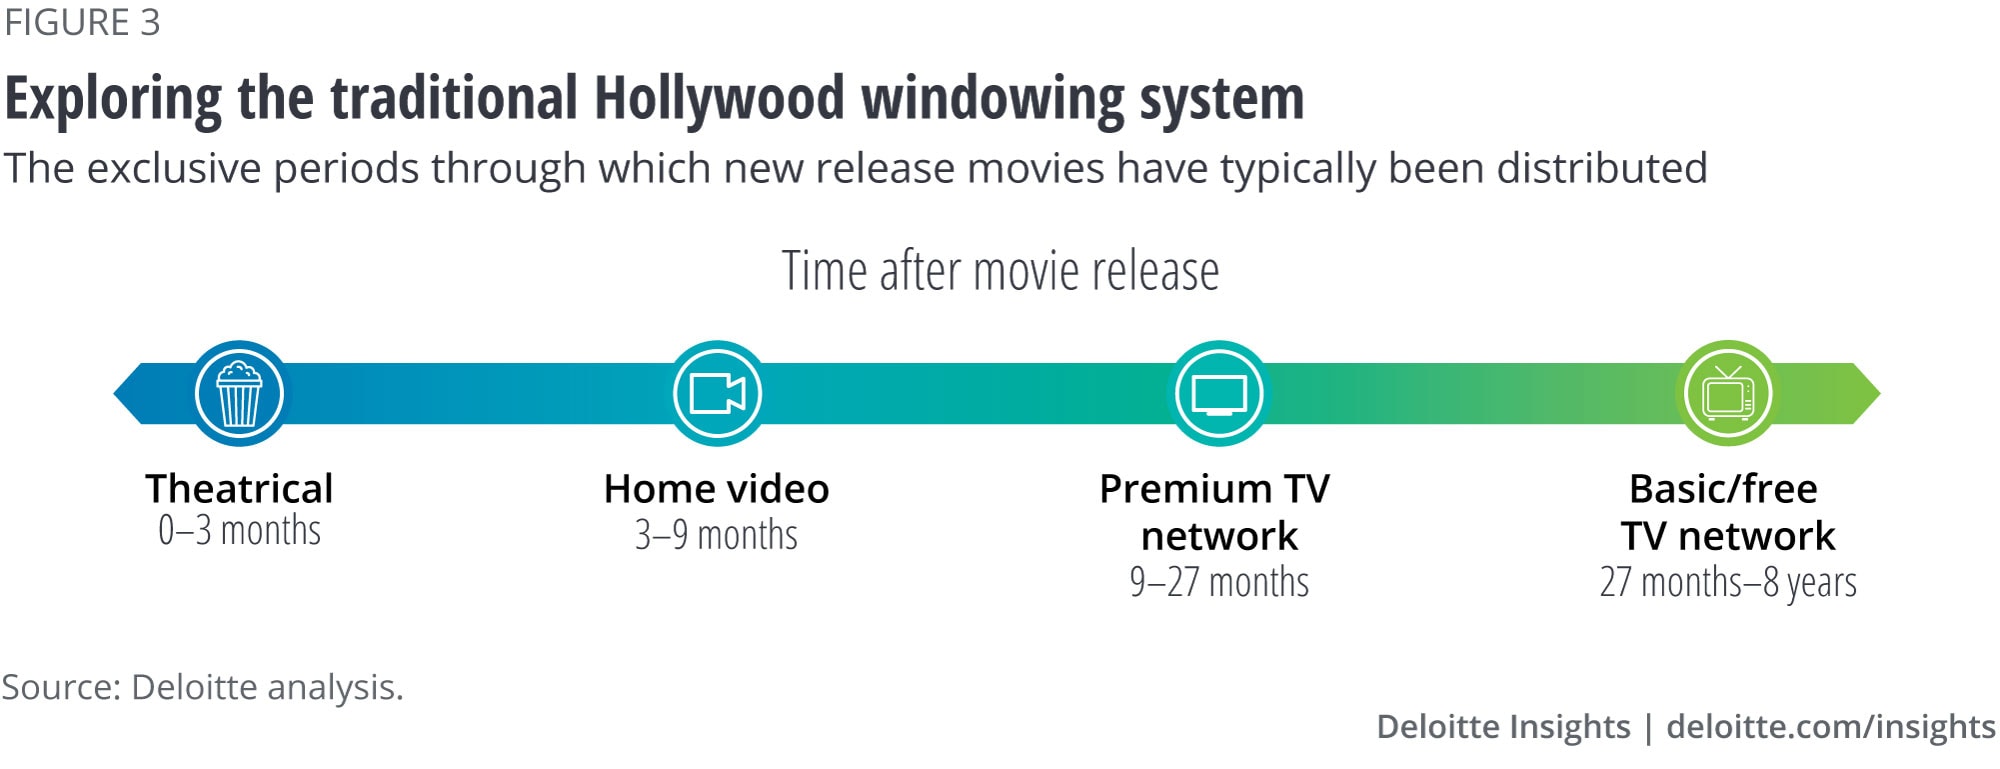 Exploring the traditional Hollywood windowing system